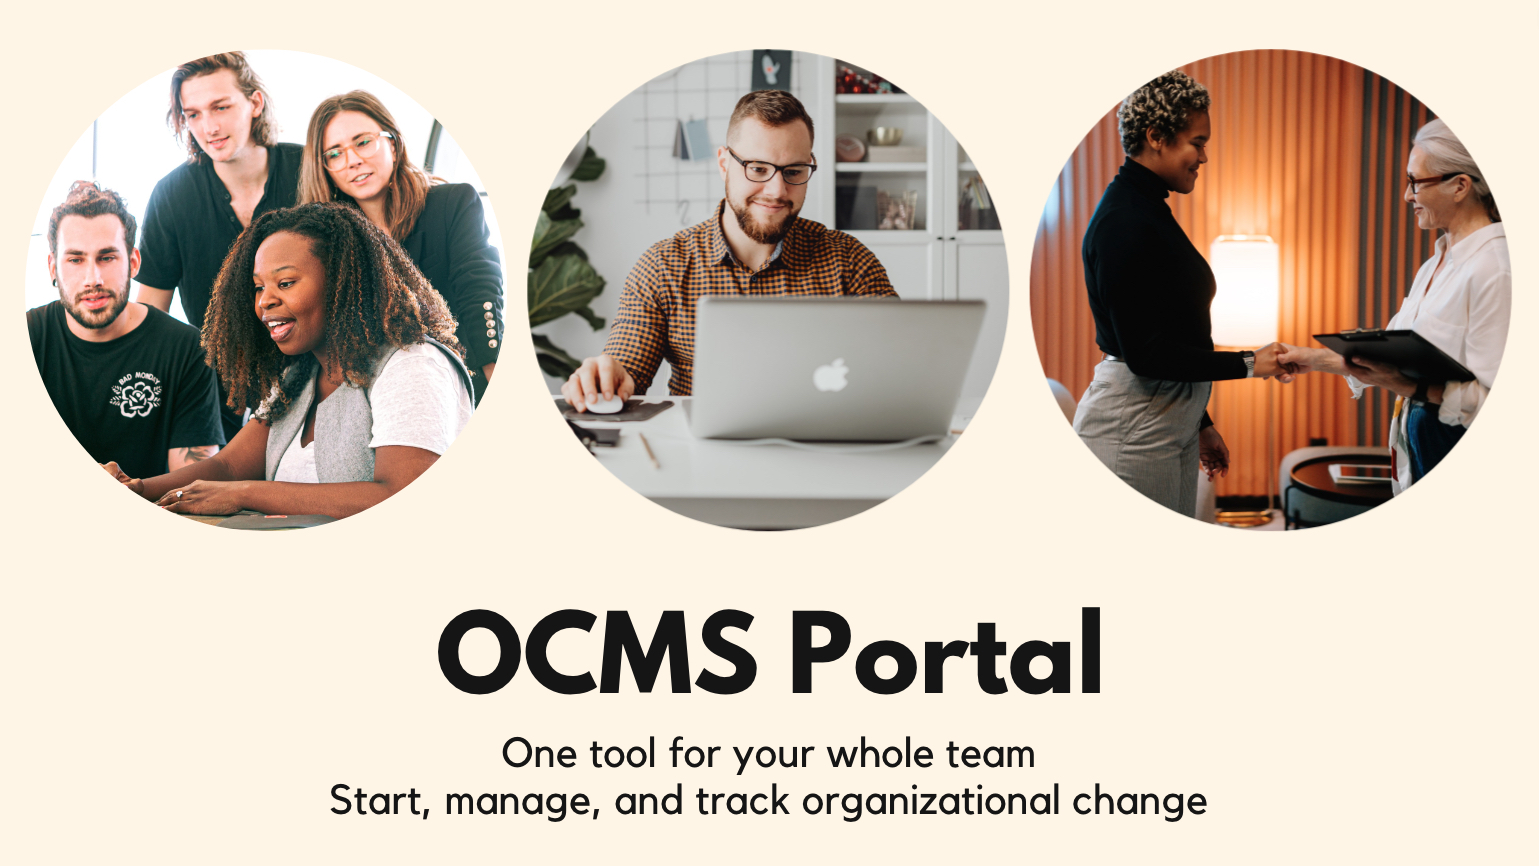 OCMS Portal - One tool for your whole team